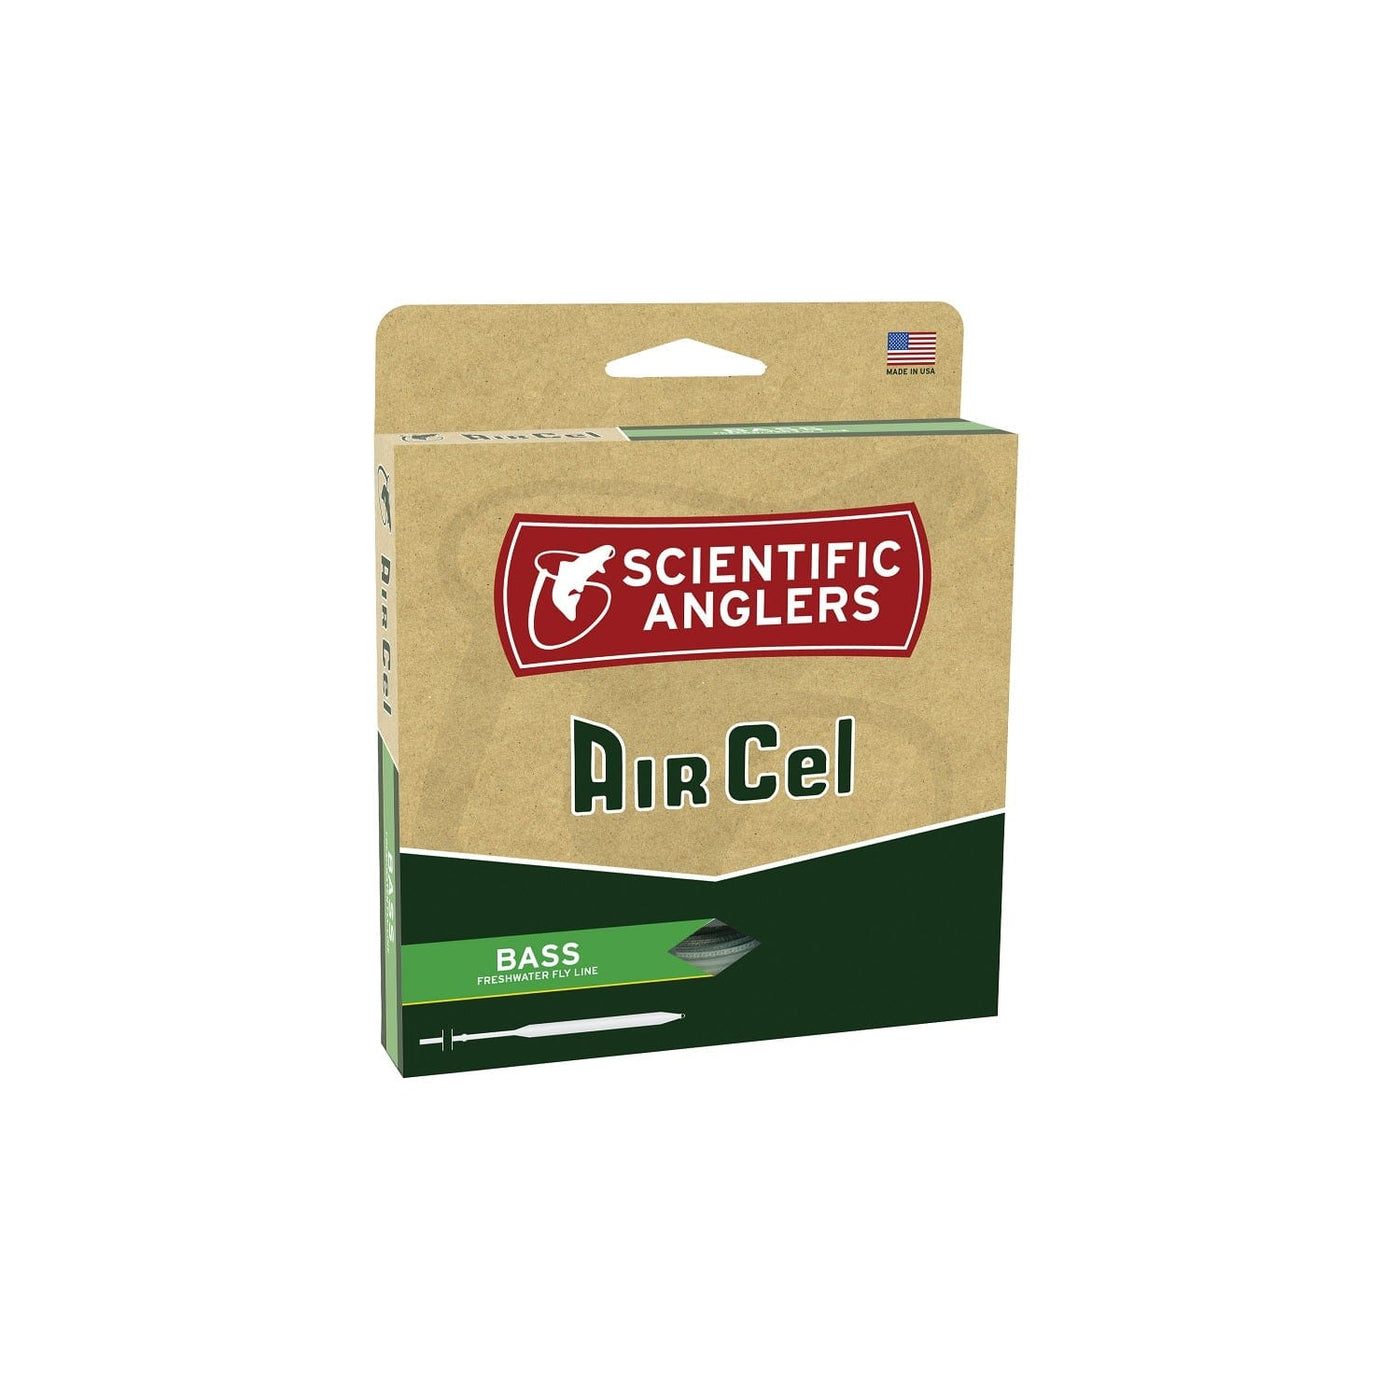 Scientific Anglers Scientific Anglers AirCel Floating Bass Fly Line-7 8-Yellow Fishing